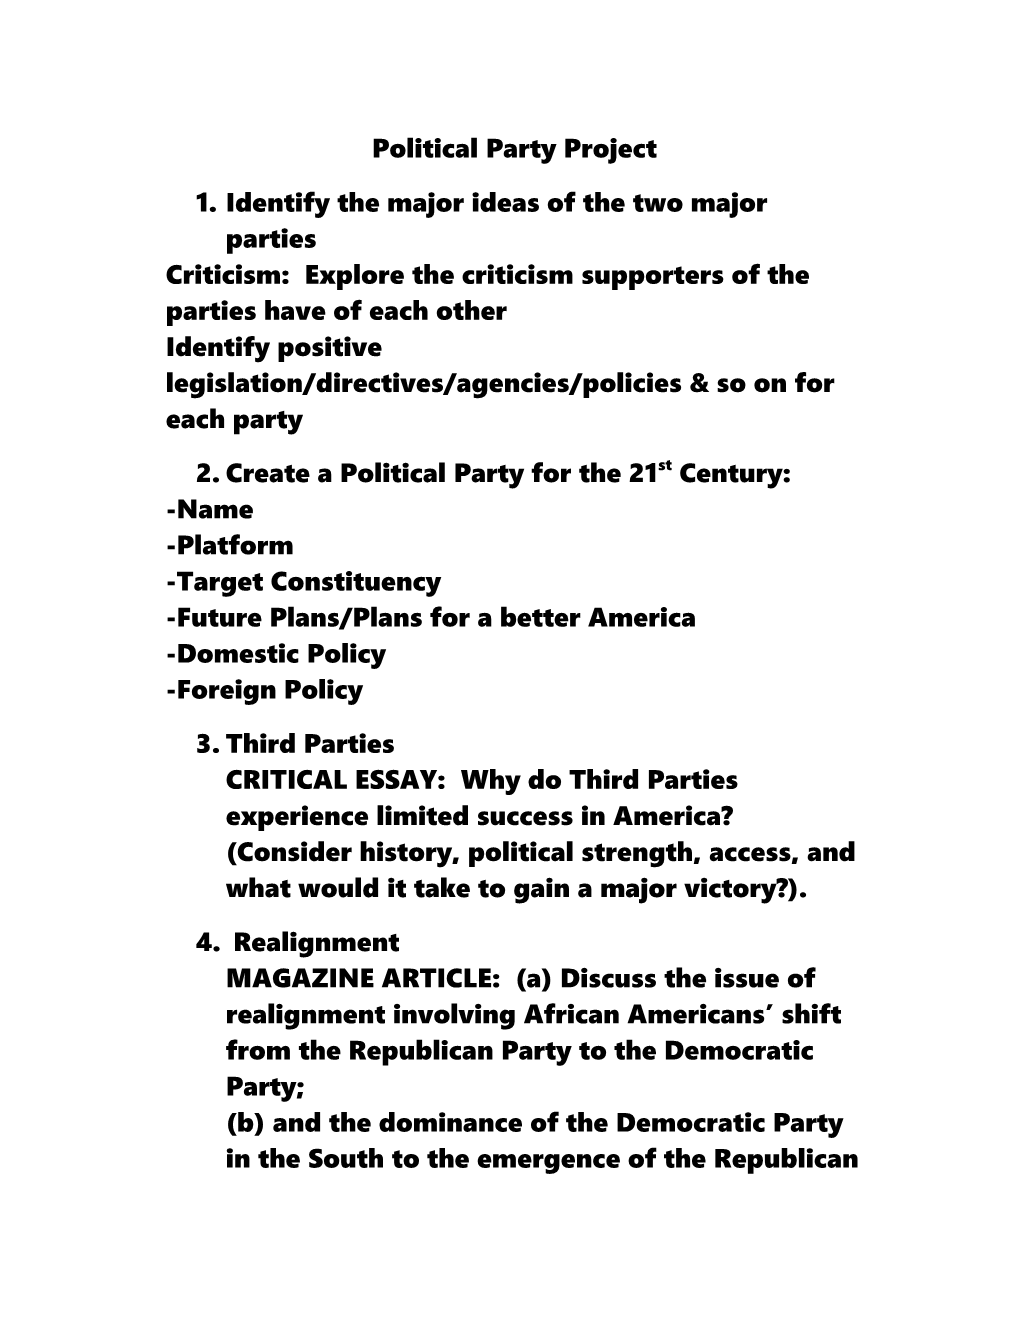 Identify the Major Ideas of the Two Major Parties